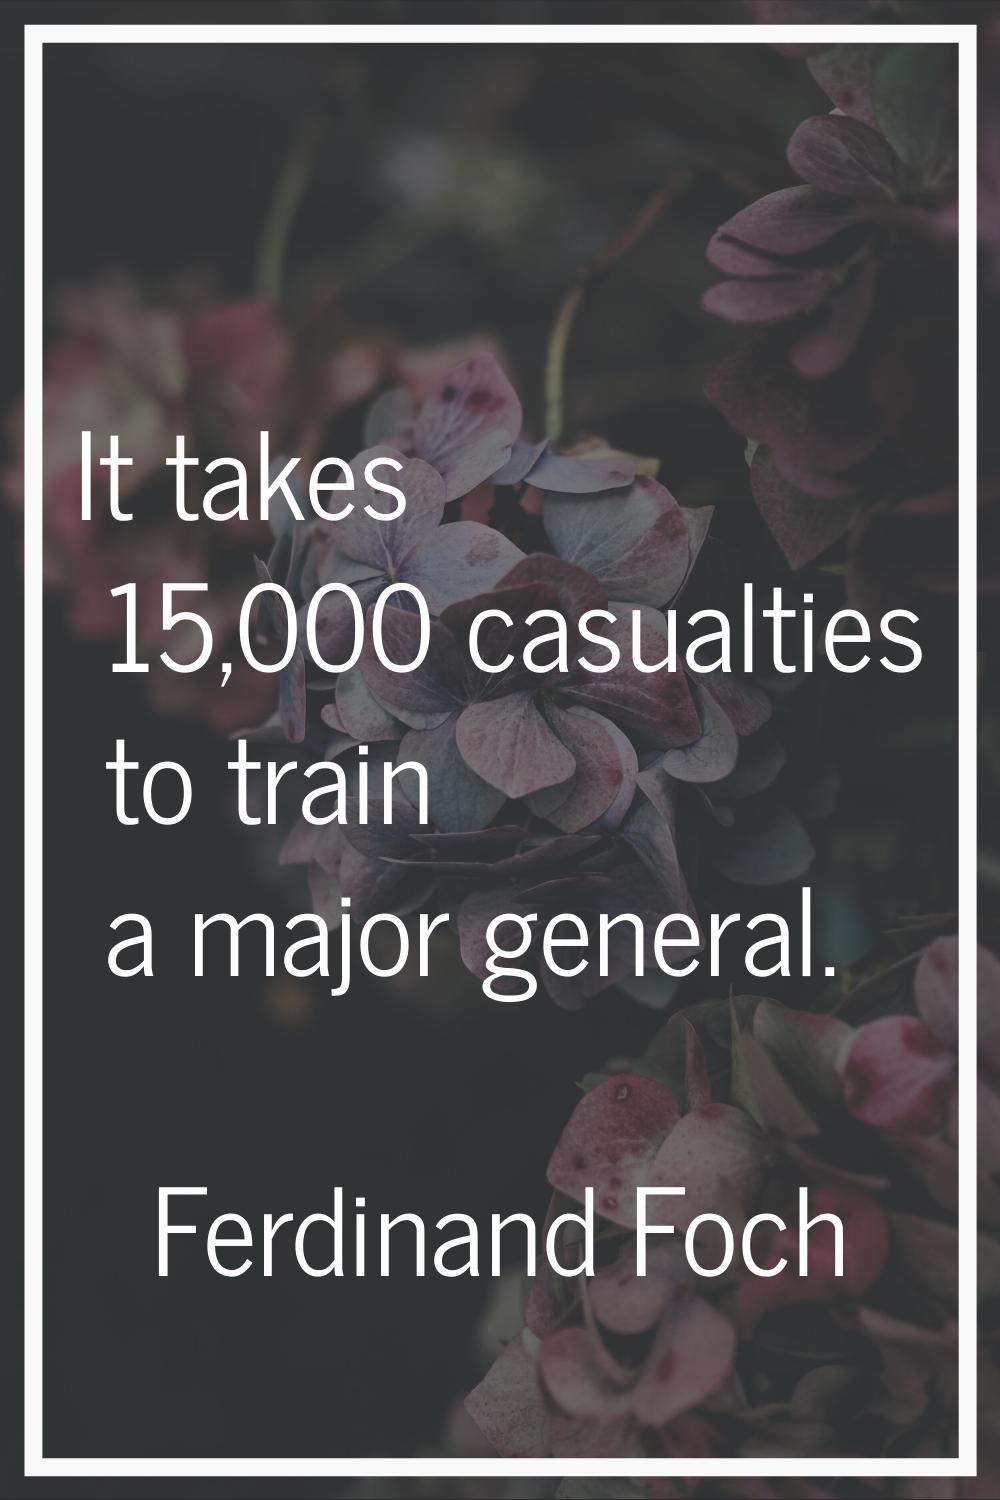 It takes 15,000 casualties to train a major general.